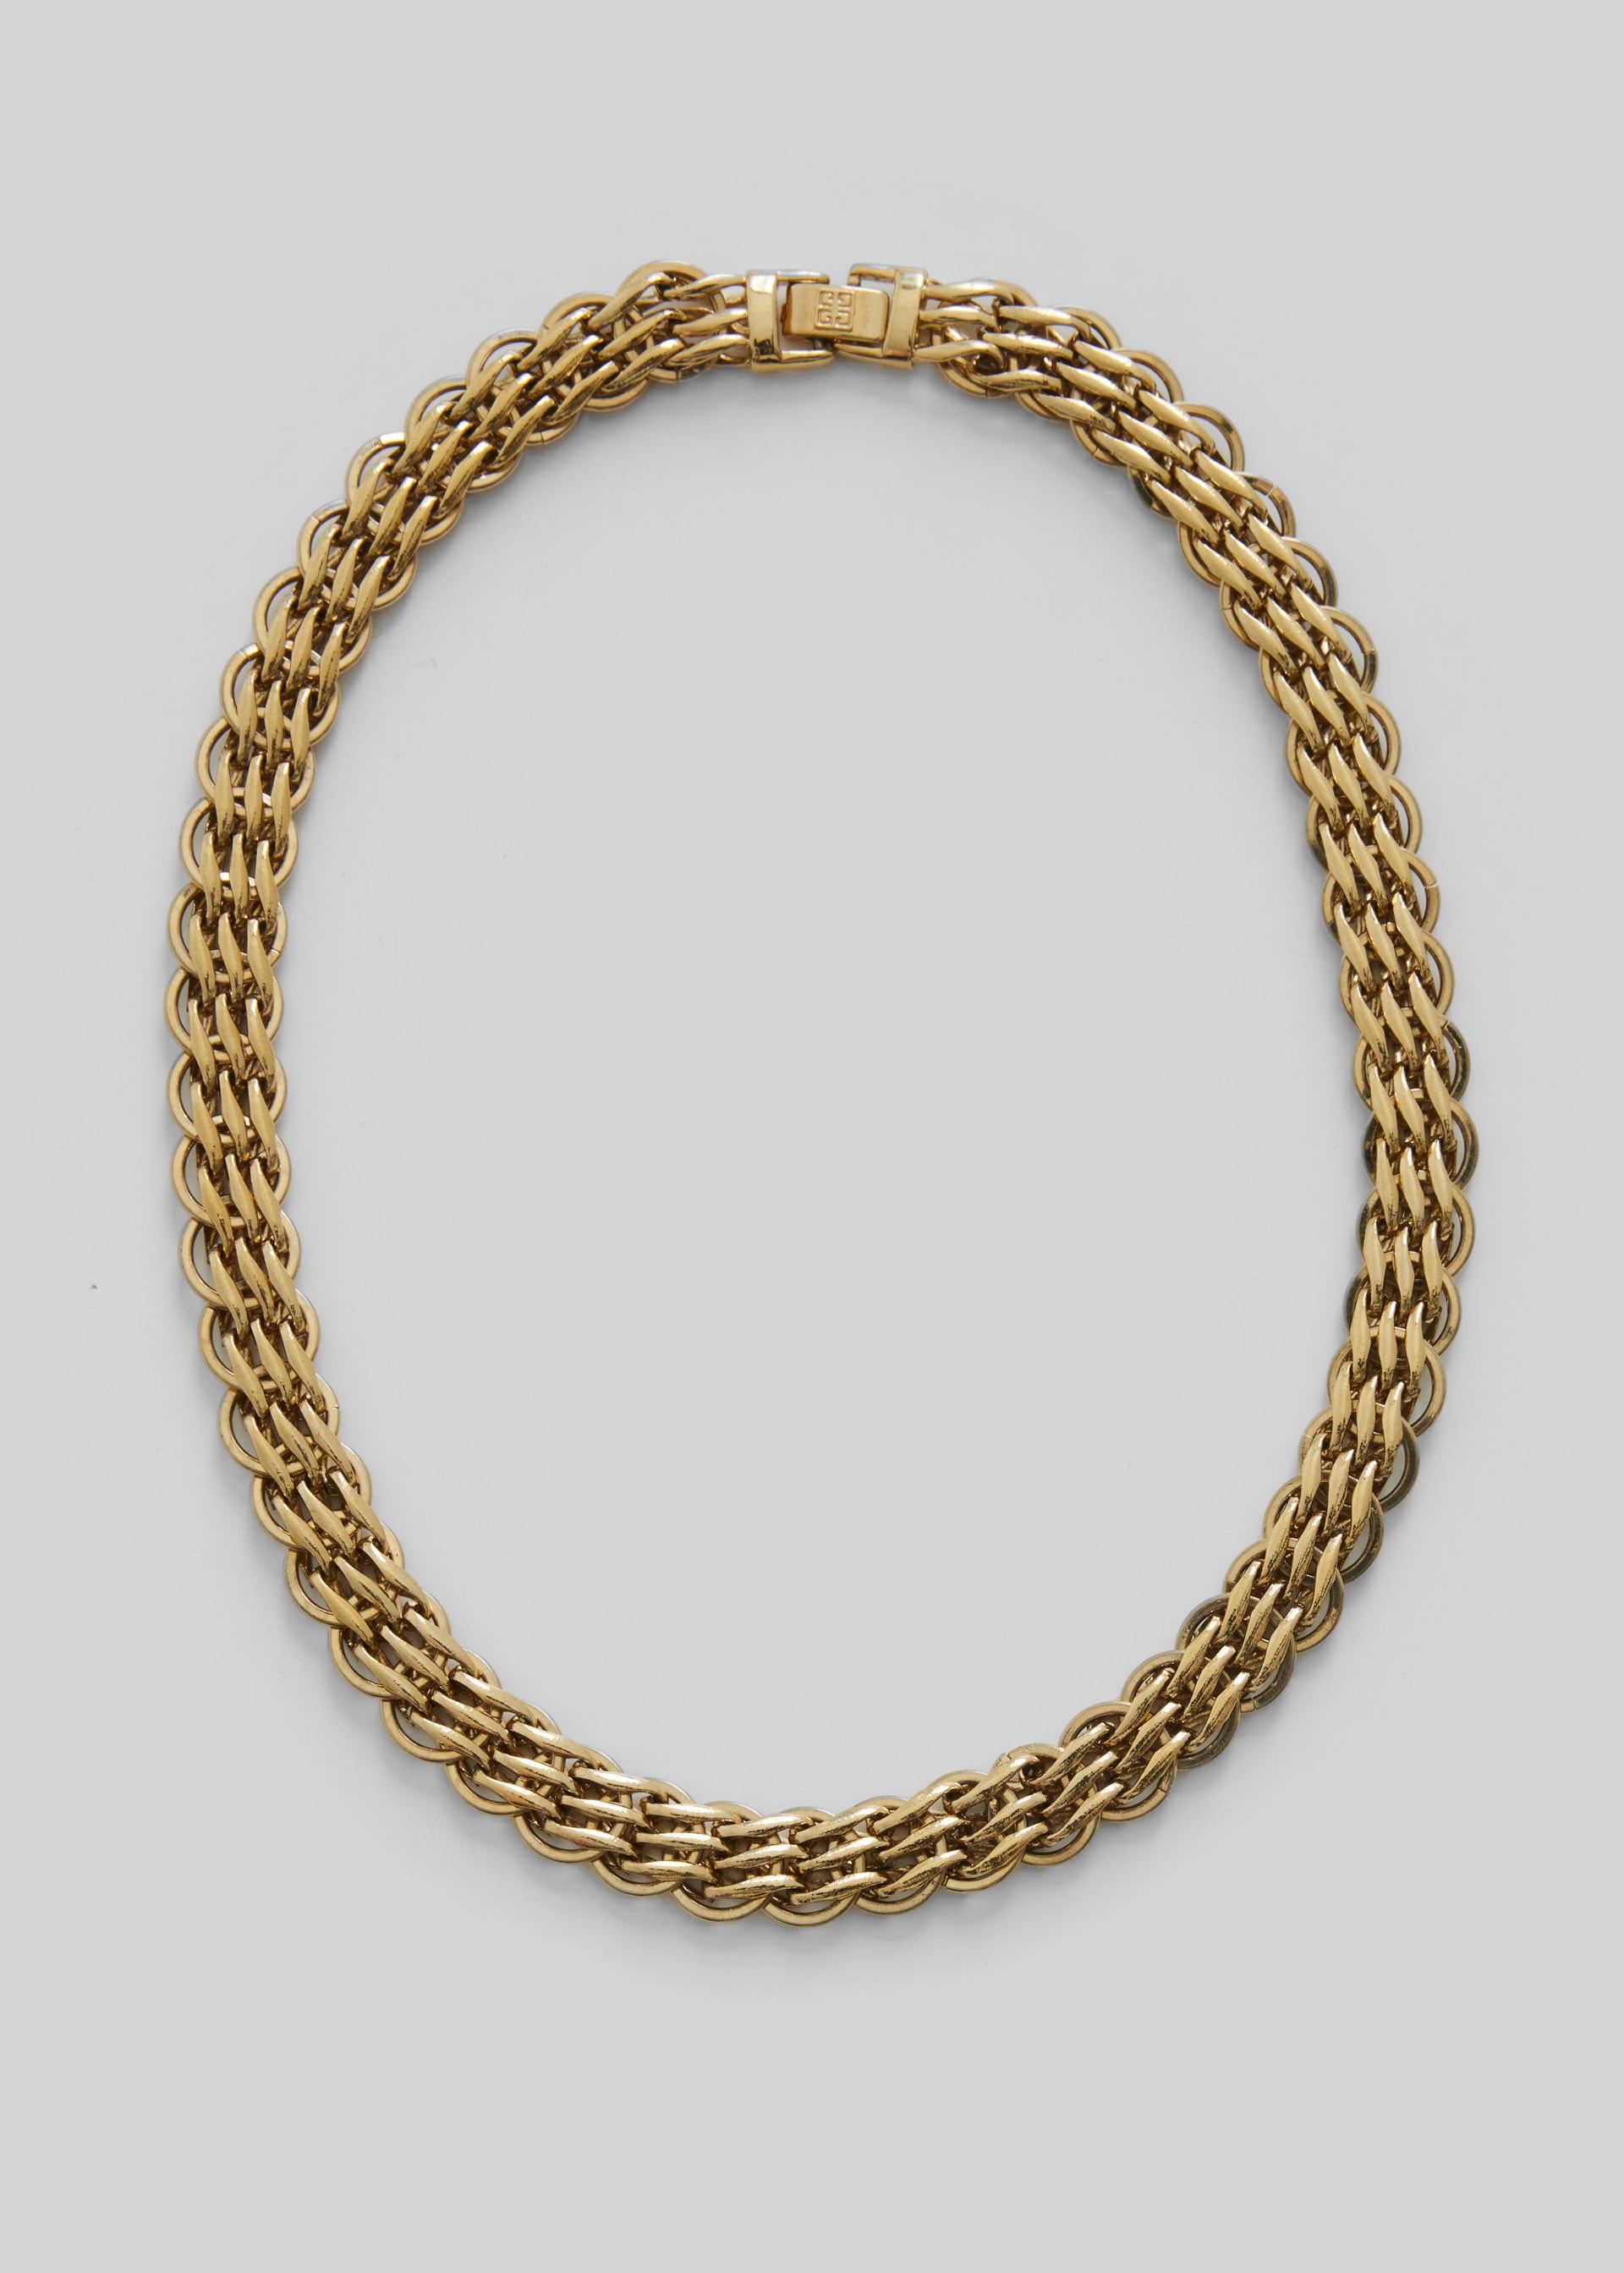 VINTAGE GIVENCHY CHAIN NECKLACE